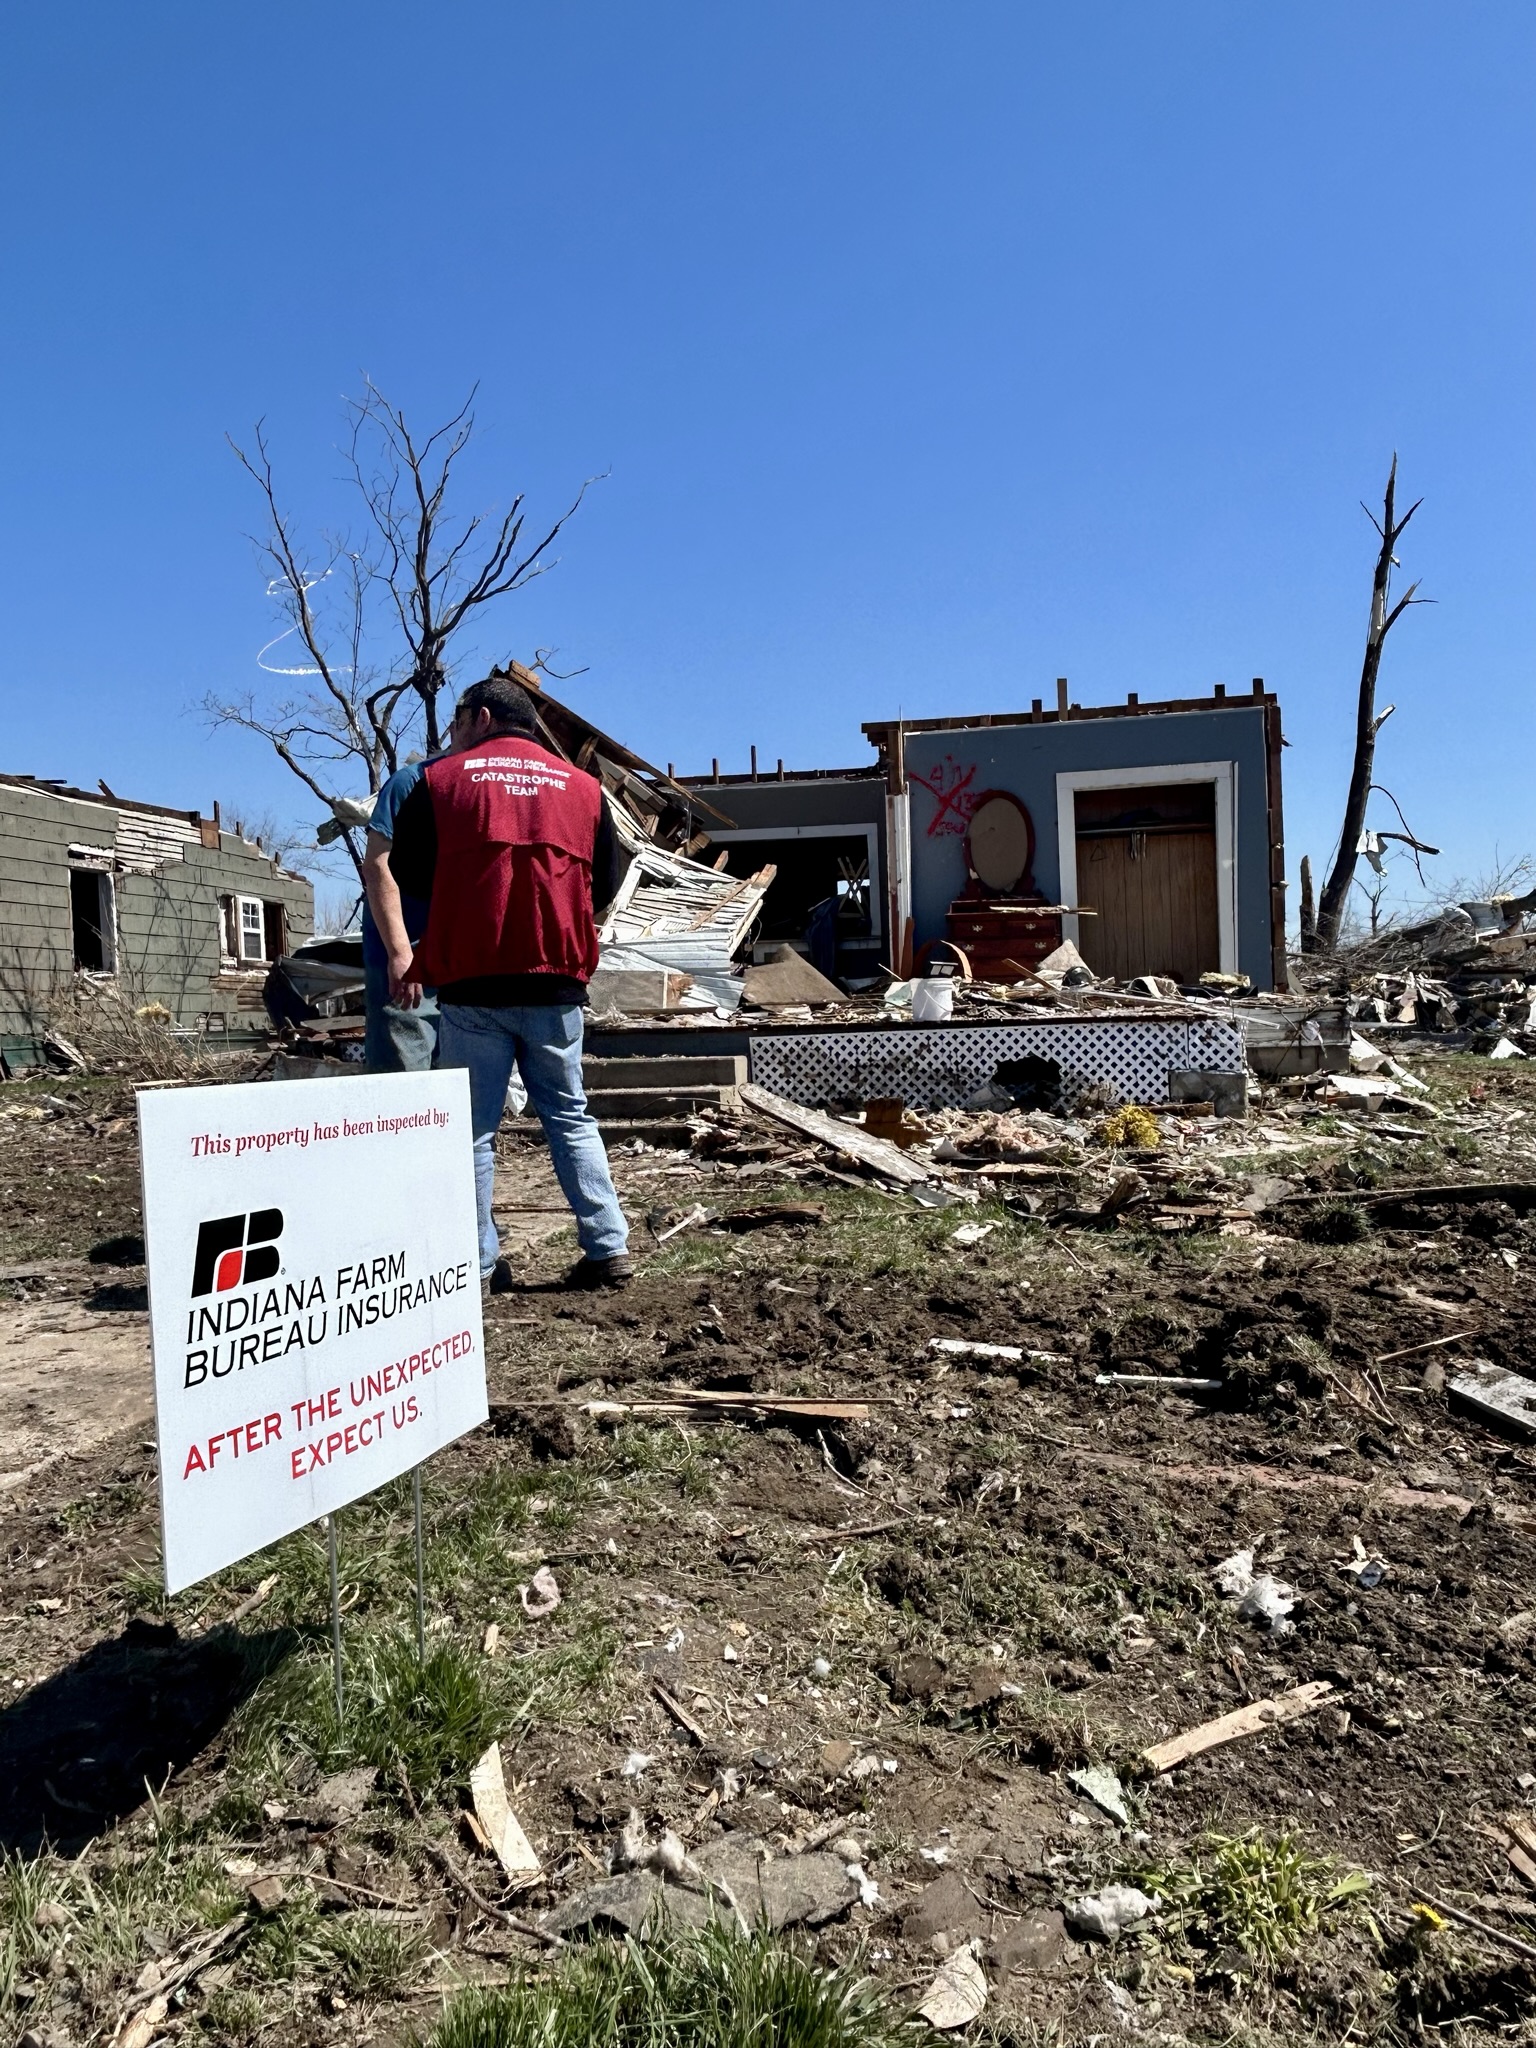 An Indiana Farm Bureau Insurance claims representative stands in the yard of a home destroyed by a tornado in Sullivan, Indiana. In the foreground there is an Indiana Farm Bureau Insurance yard sign that says 